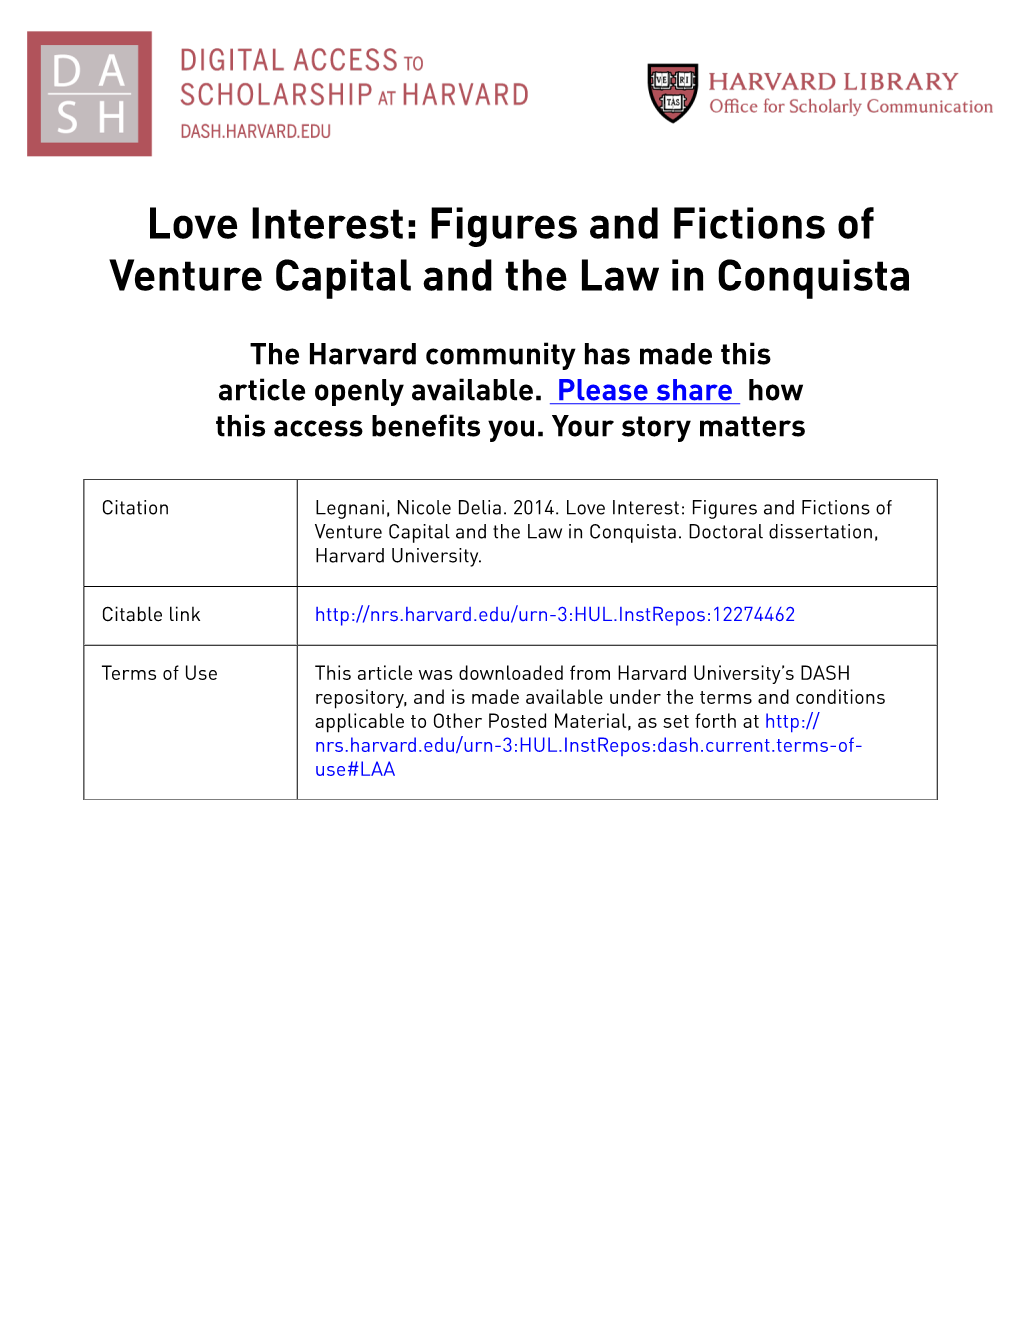 Love Interest: Figures and Fictions of Venture Capital and the Law in Conquista